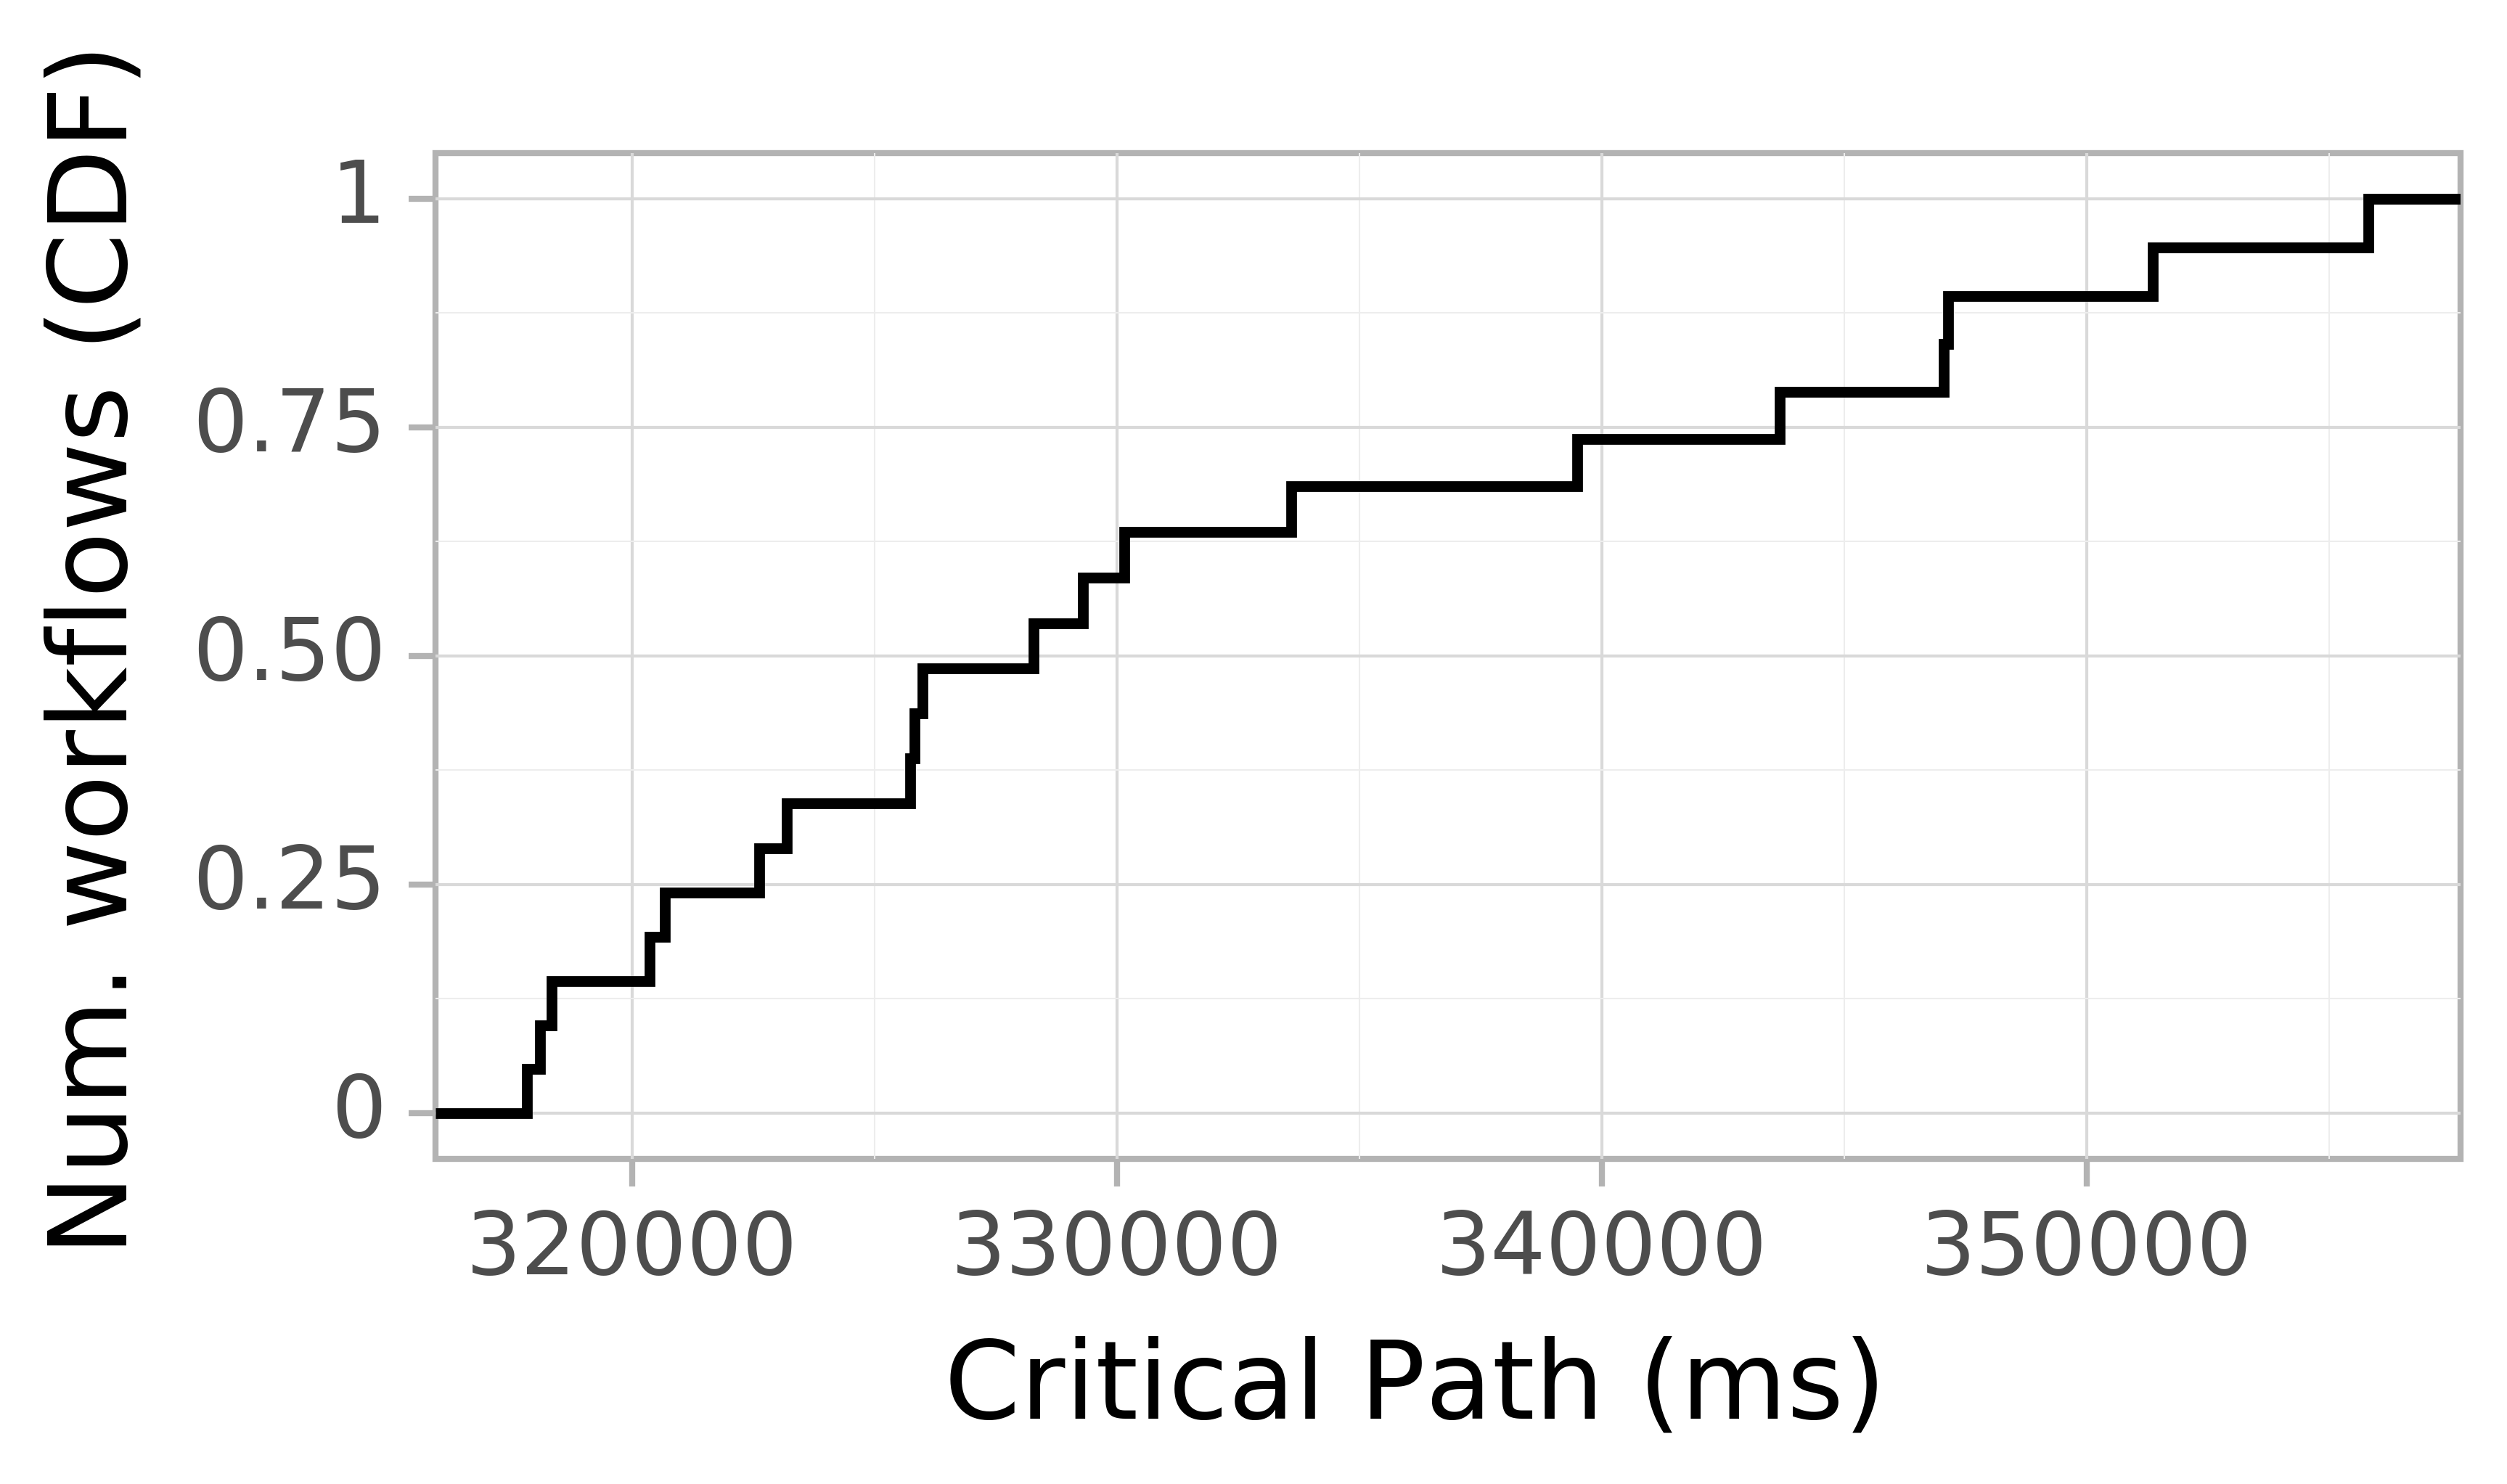 Job runtime CDF graph for the askalon-new_ee3 trace.